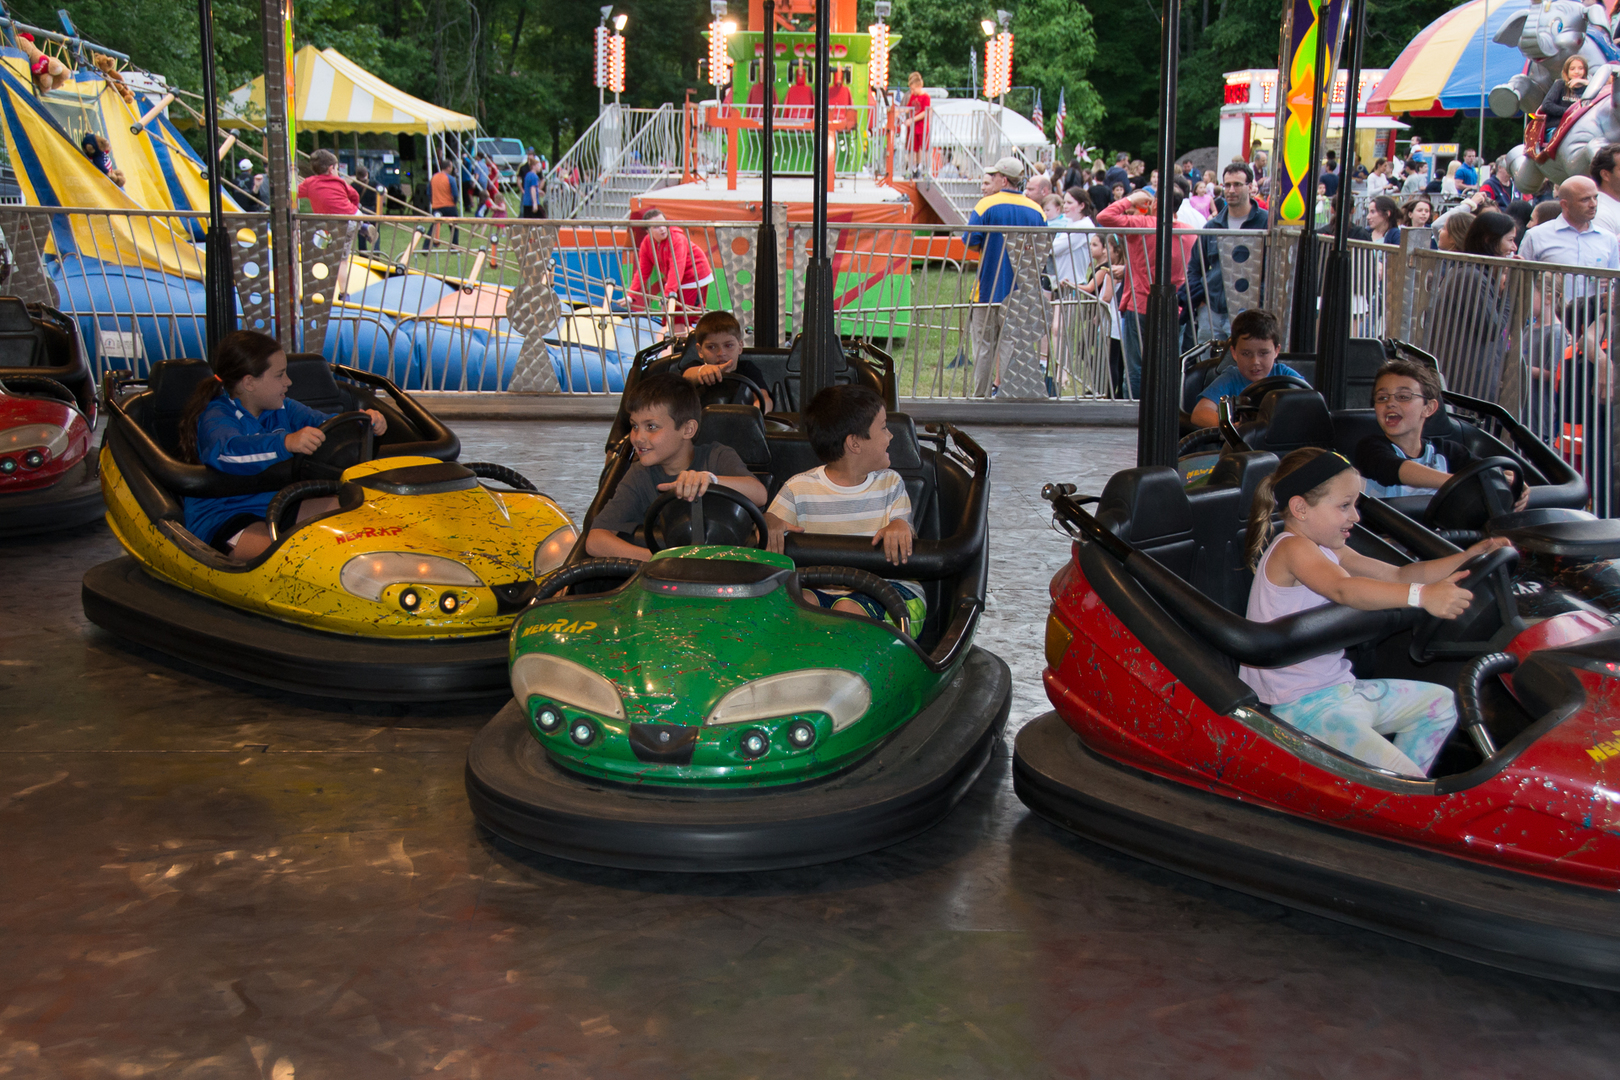 Armonk Lions Club Fol-de-Rol and Country Fair, Armonk, New York, United States